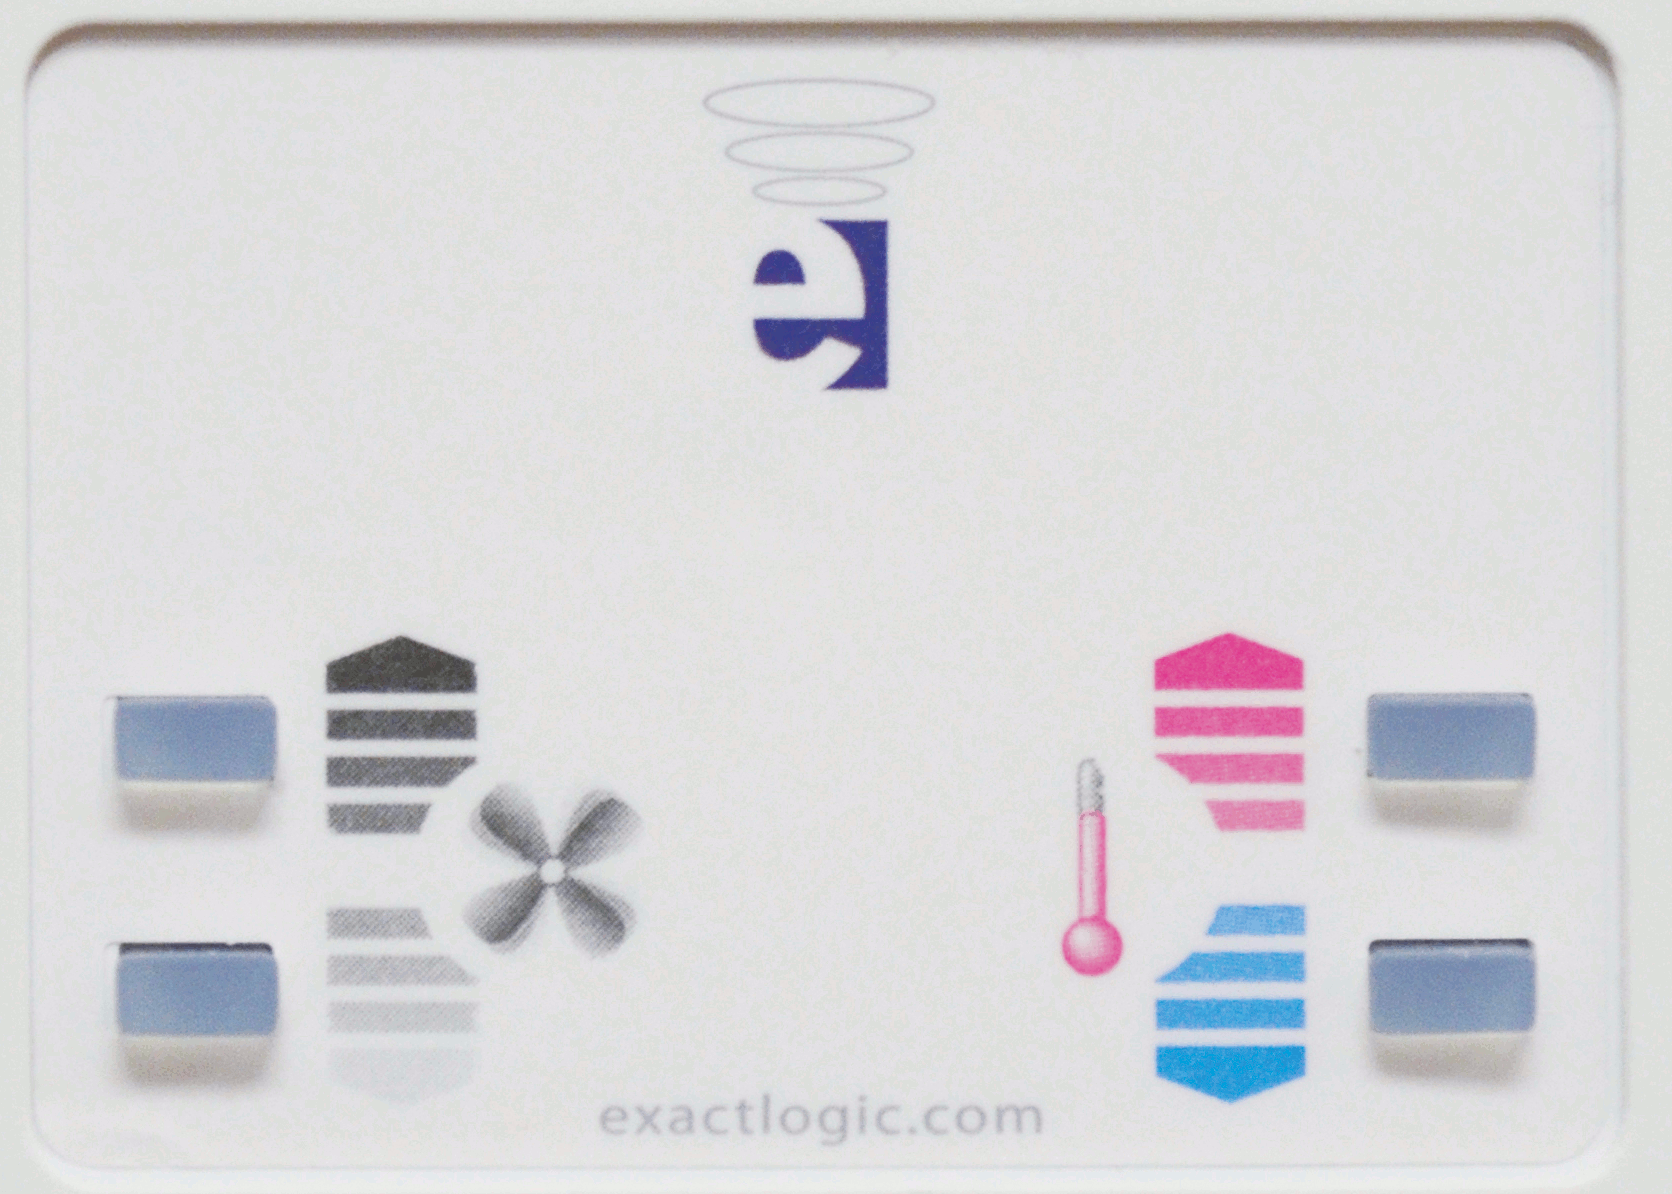 1000 Custom Labels for ExactLogic Thermostats